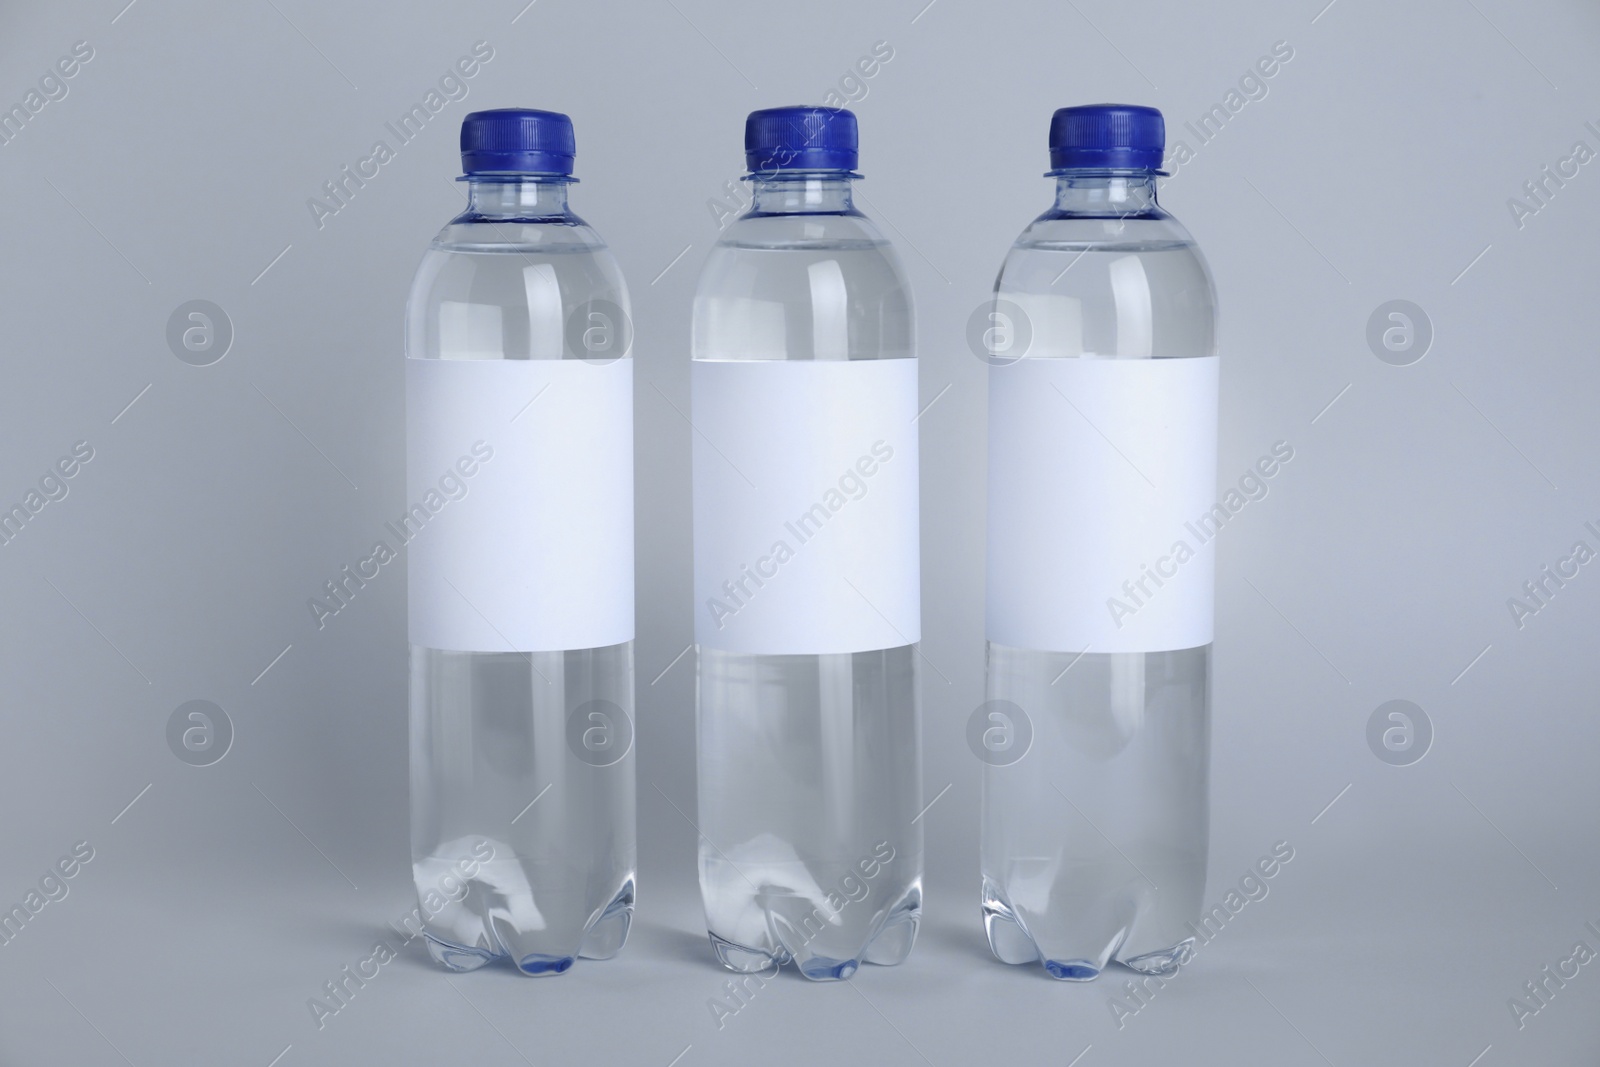 Photo of Plastic bottles with soda water on light background